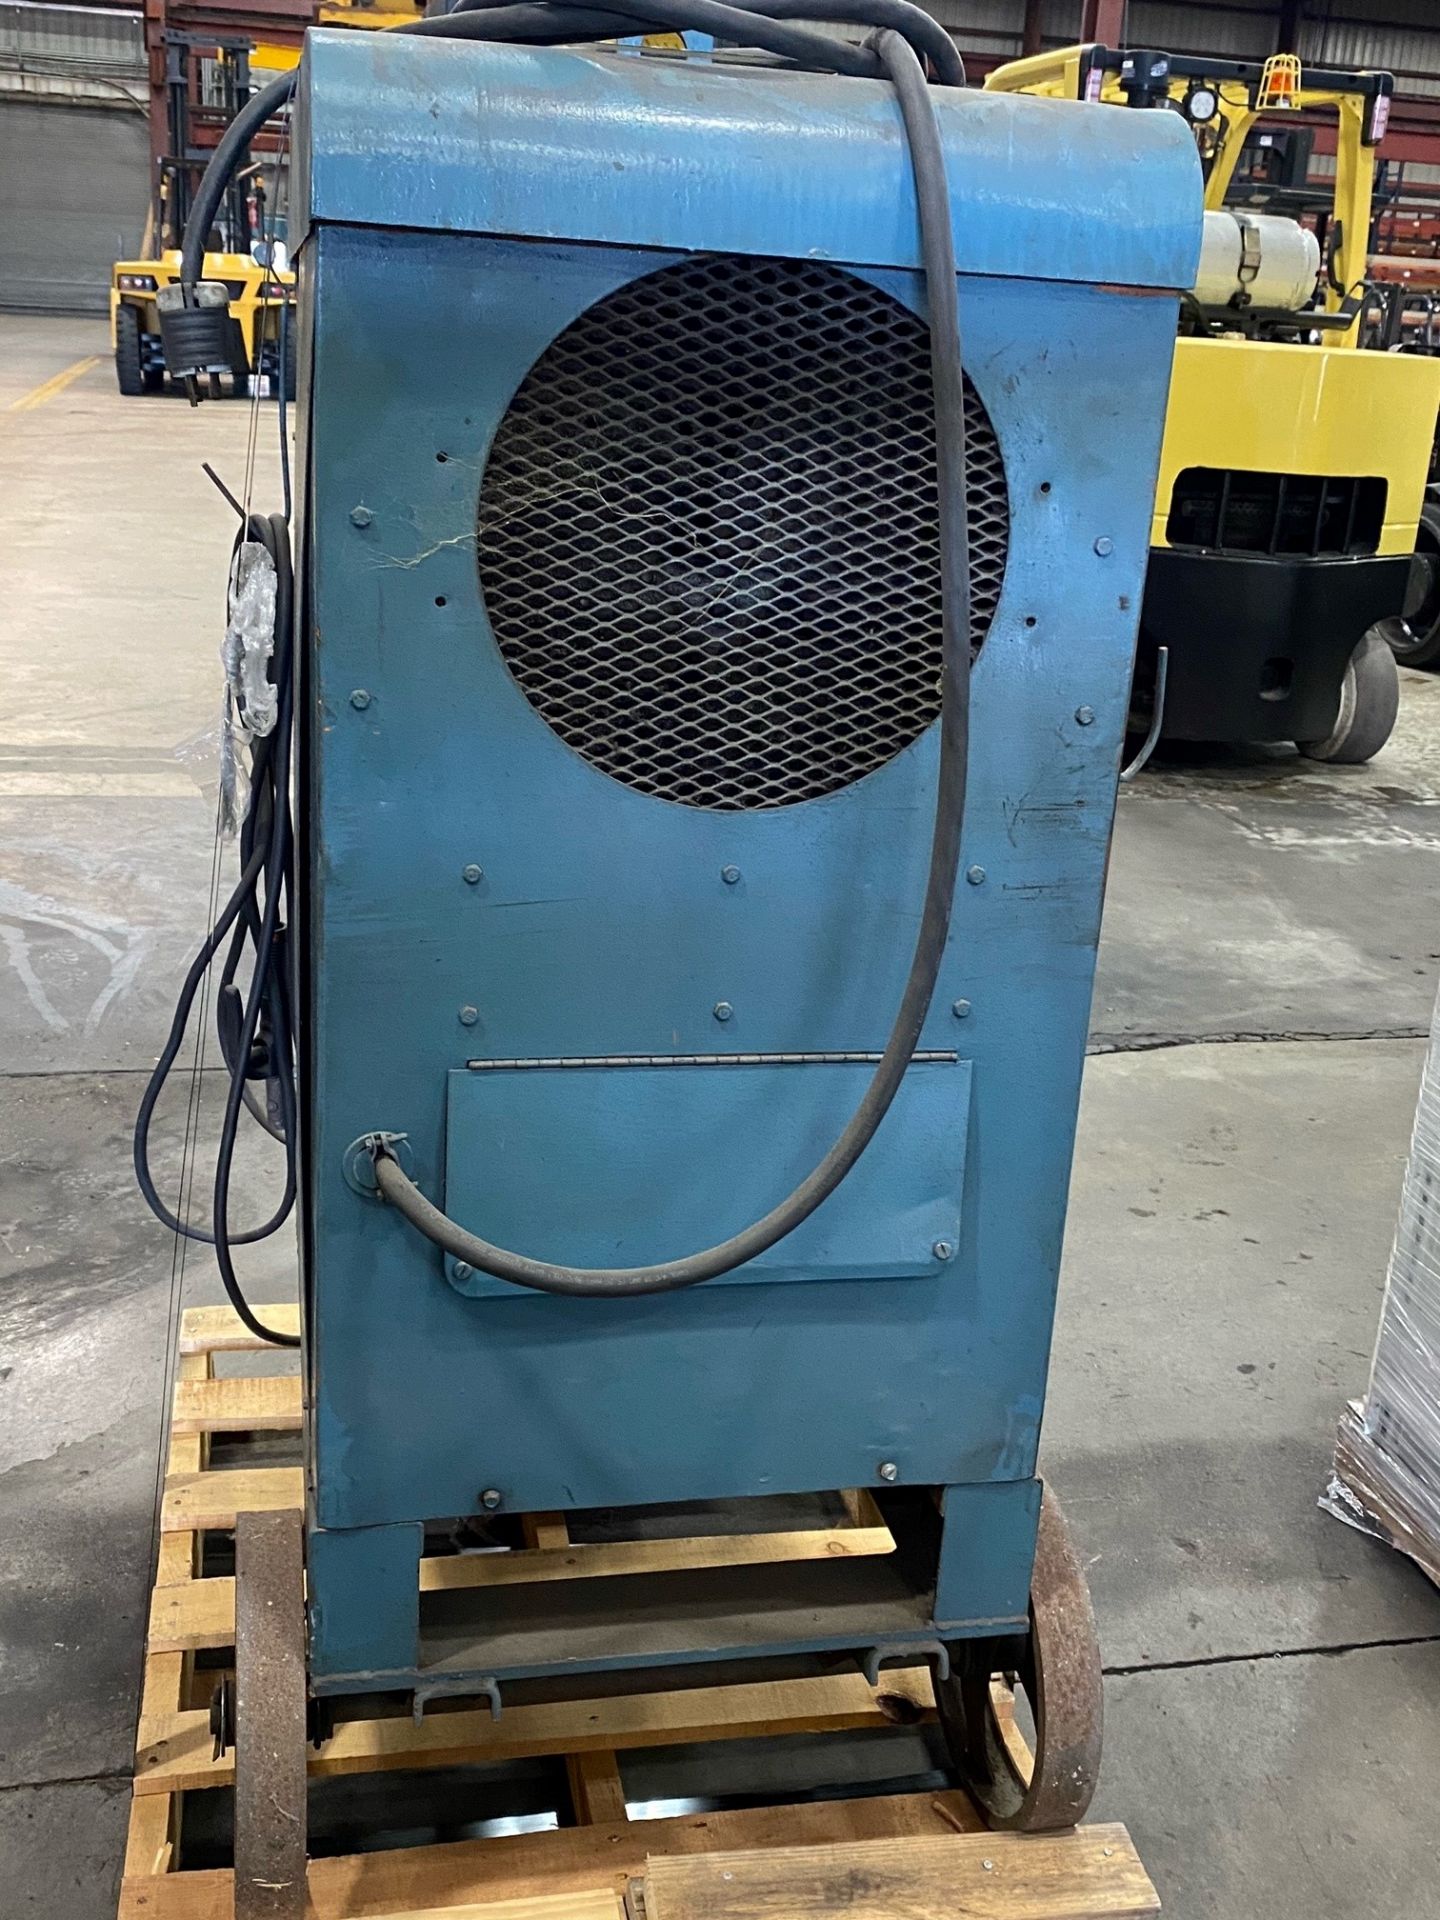 WELDING MACHINE, AIRCO, MDL. 3A/DDS-24-A, S/N U476571 (LOCATED AT: AF GLOBAL/MASS FLANGE FACILITY, - Image 4 of 5